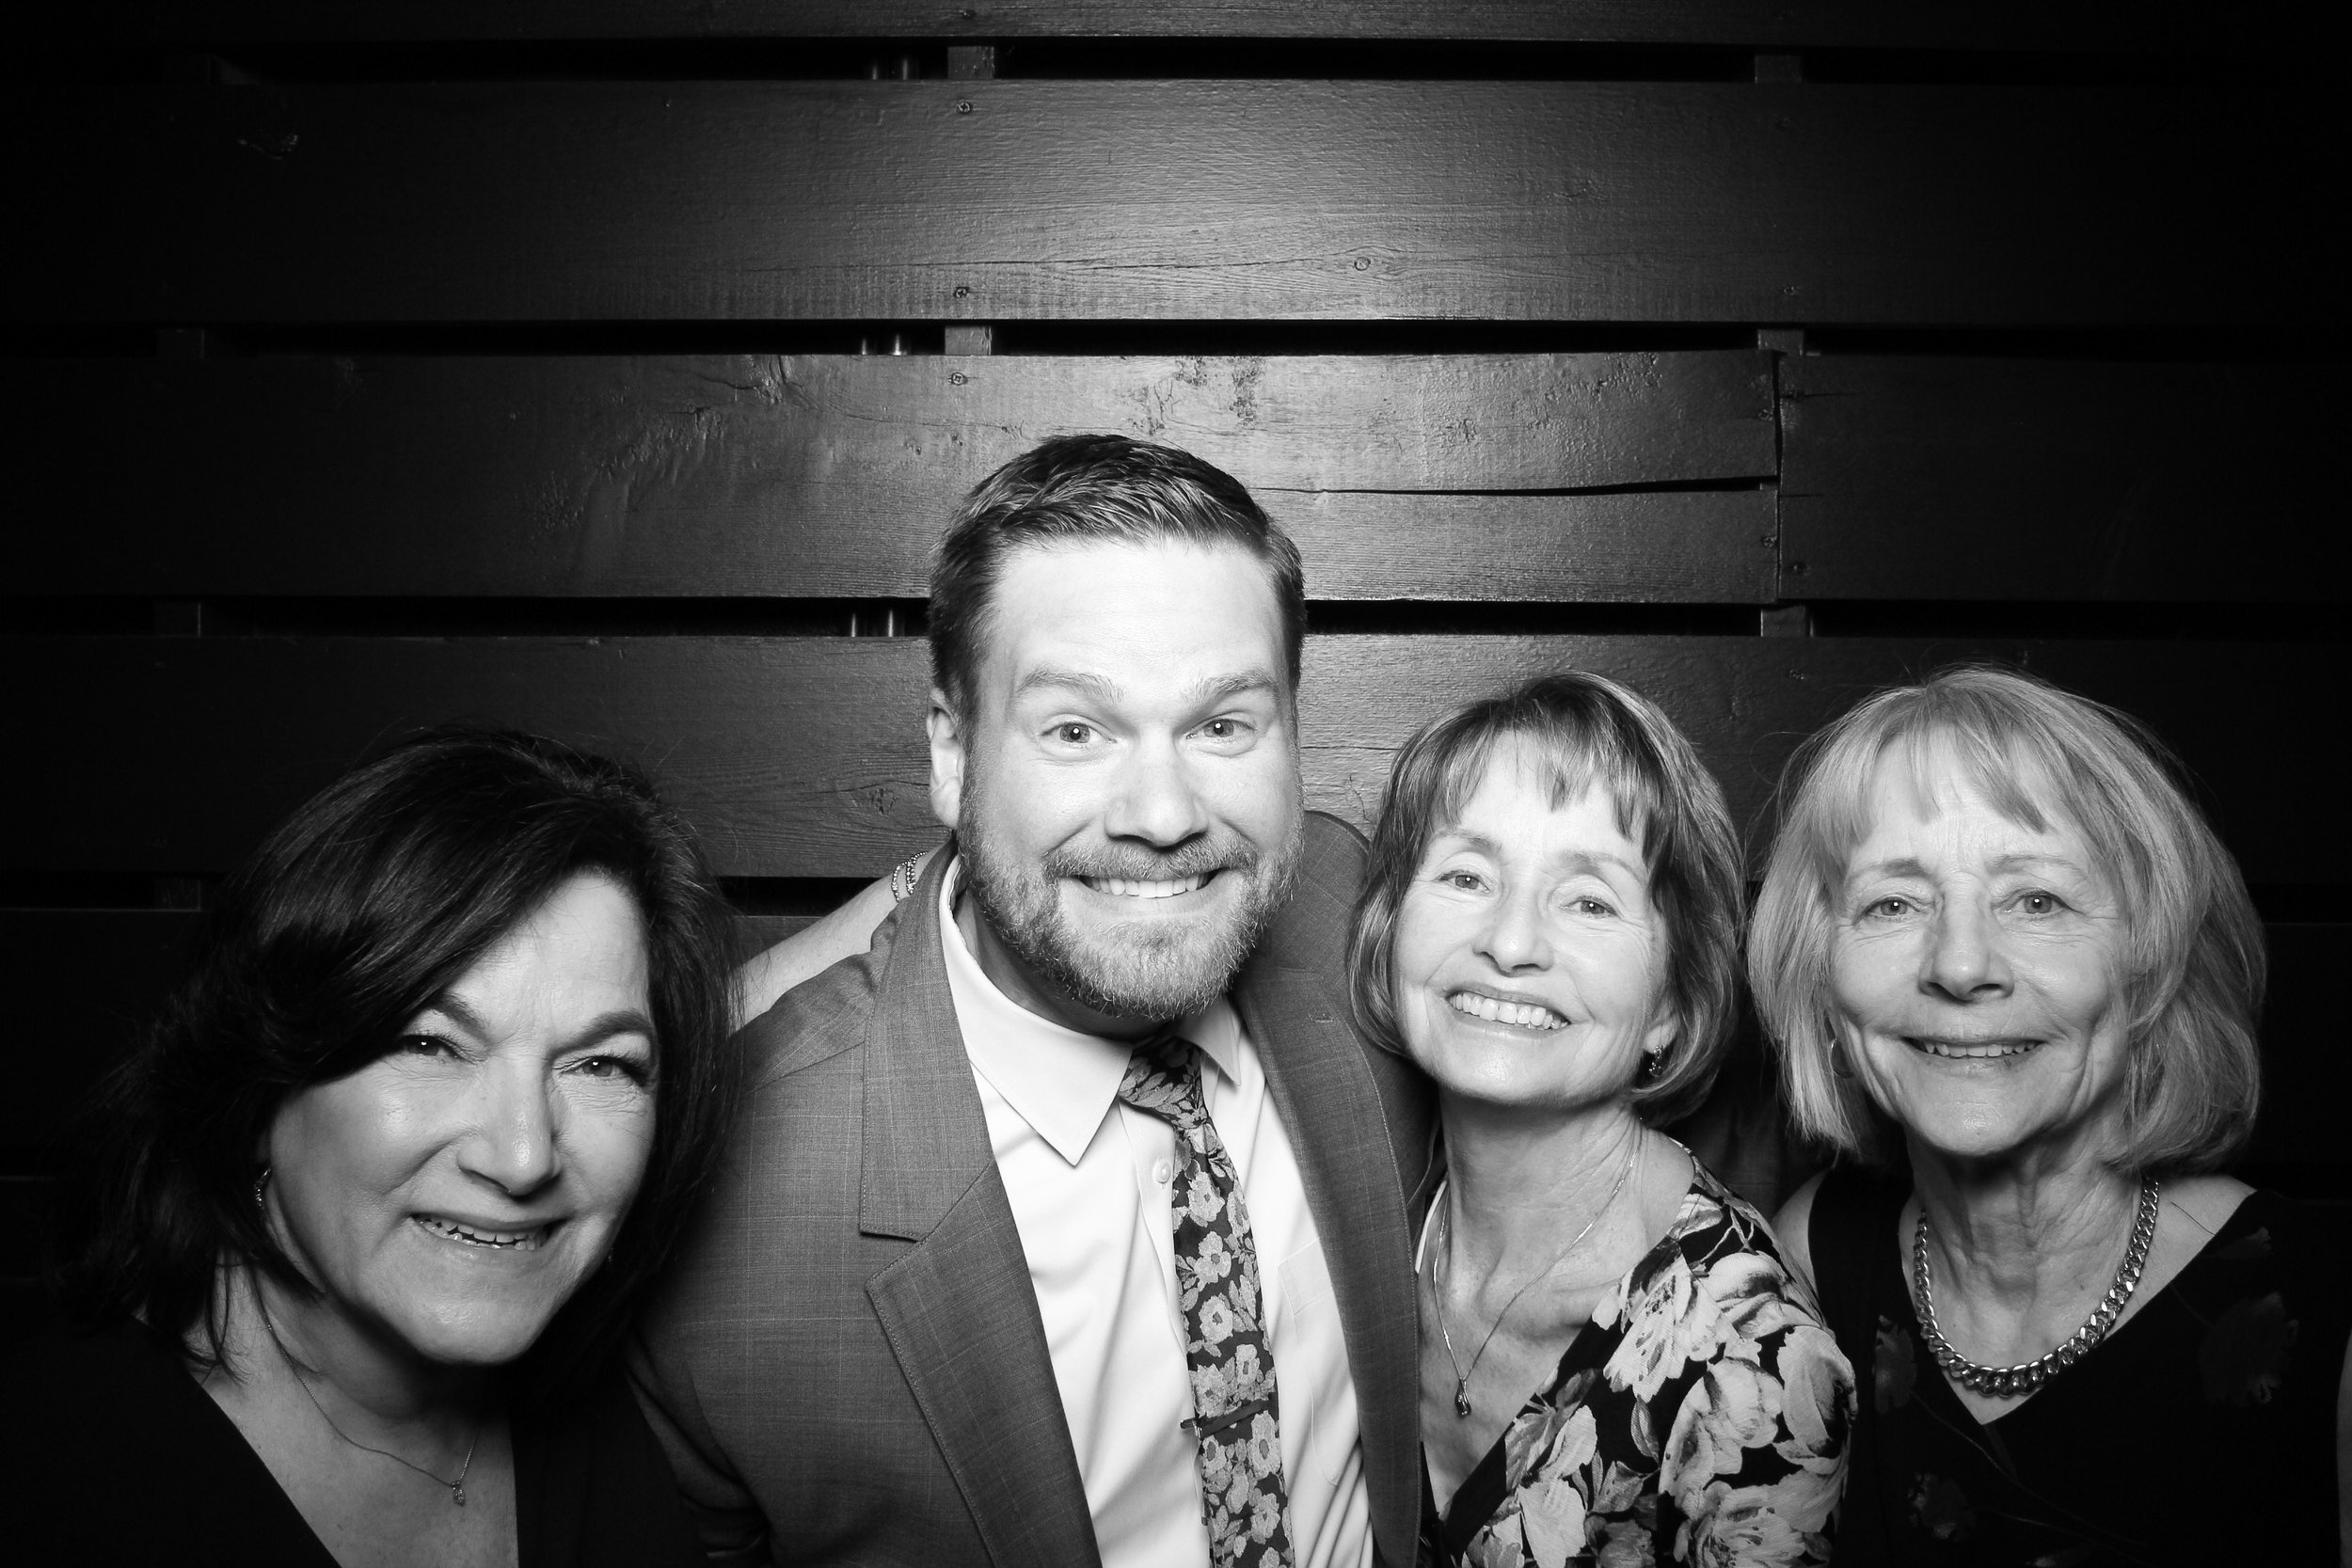 Fotio_Photo_Booth_Chicago_Winery_Clark_Street_Party_Family_Fun_Terrace_Superfans_River_North_06.jpg